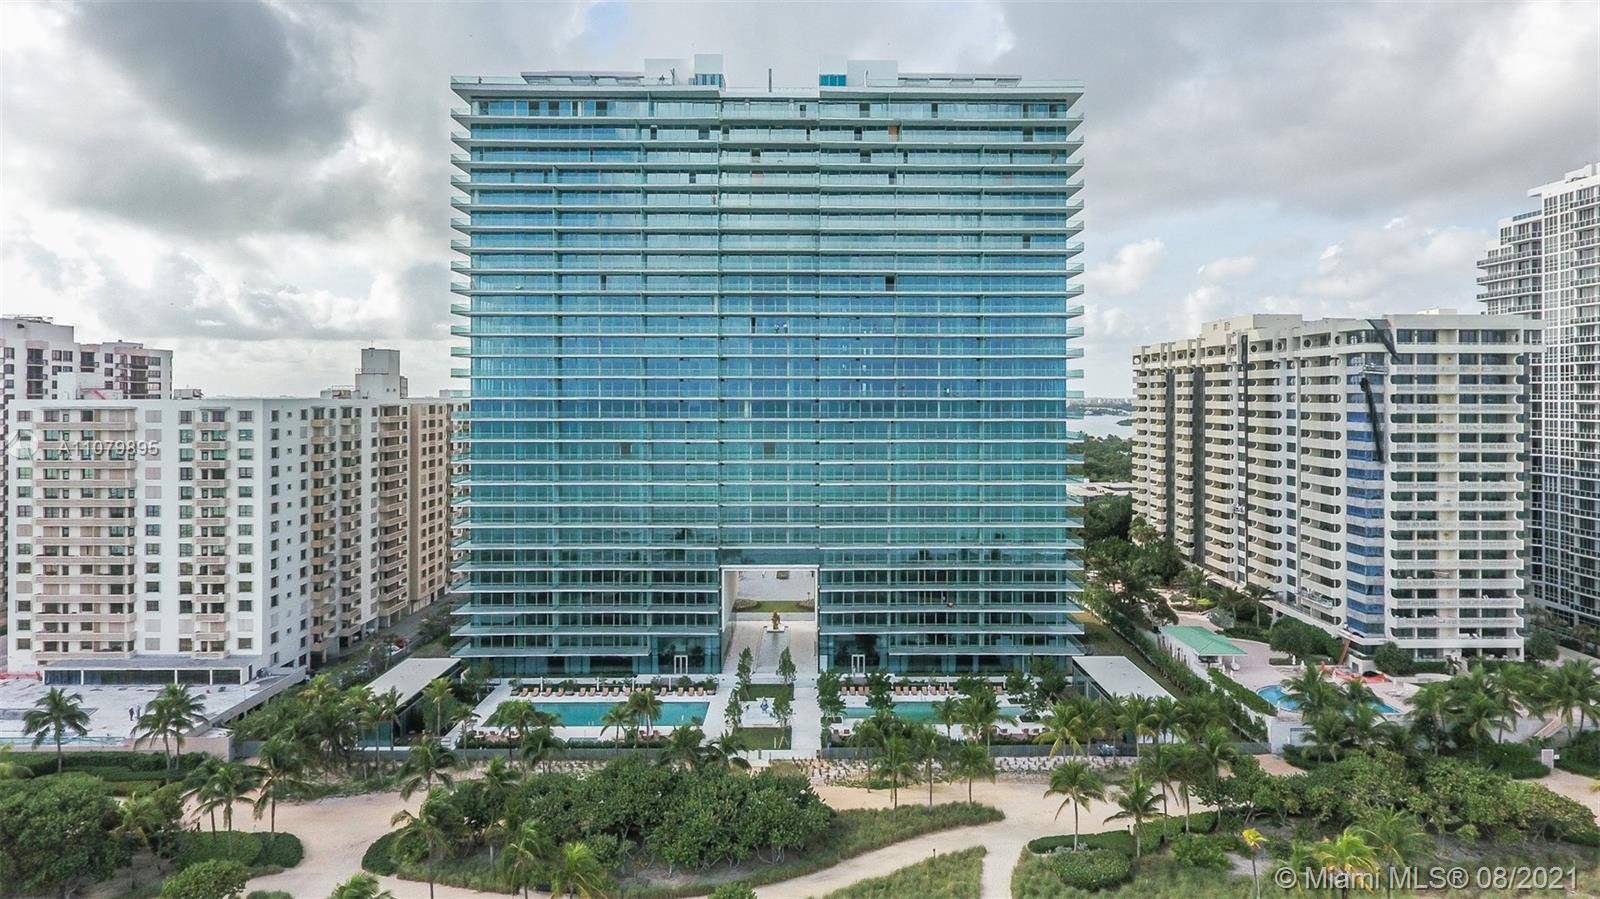 Simply The Best Oceana Bal Harbour desirable corner unit, 24th floor with completely unobstructed panoramic views of the ocean, intracoastal and Miami skyline.